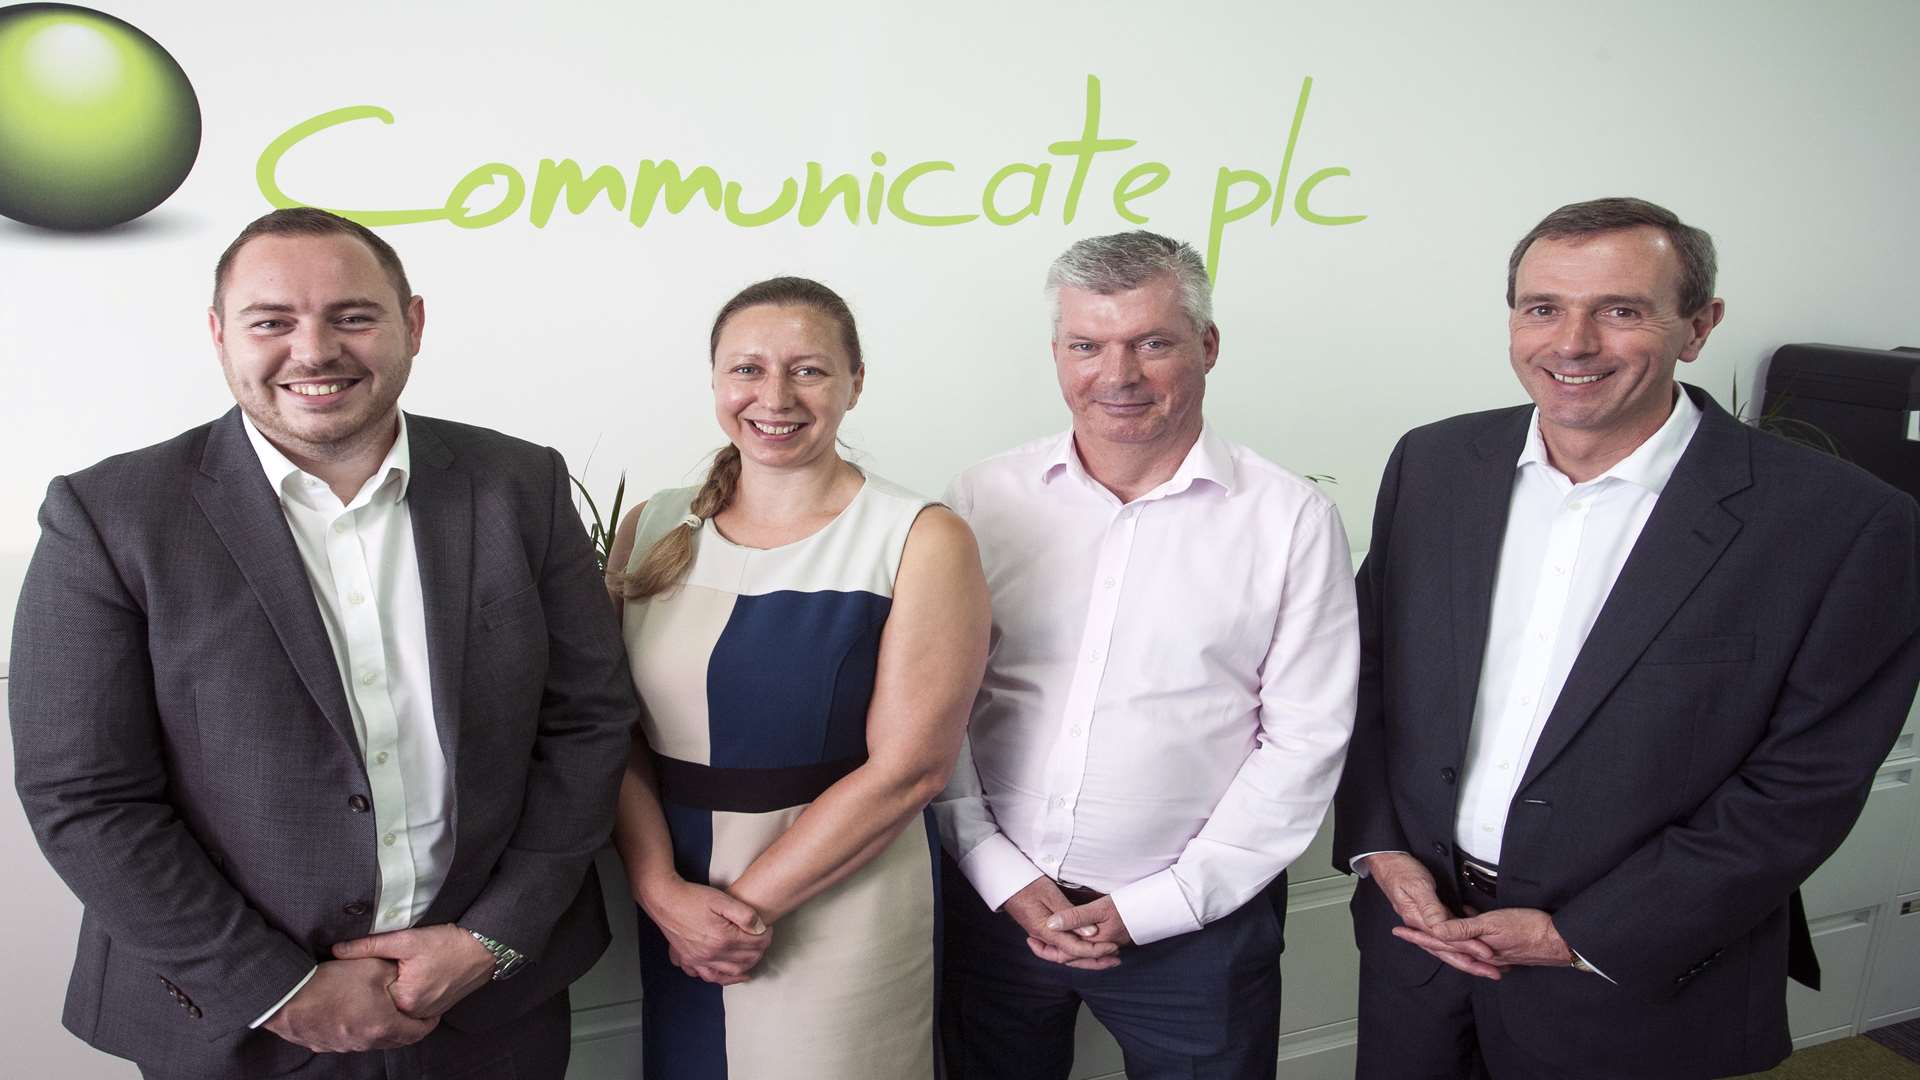 From left, Oliver Stell, Emily Bentley, Tony Snaith and John Toal of Communicate Technology